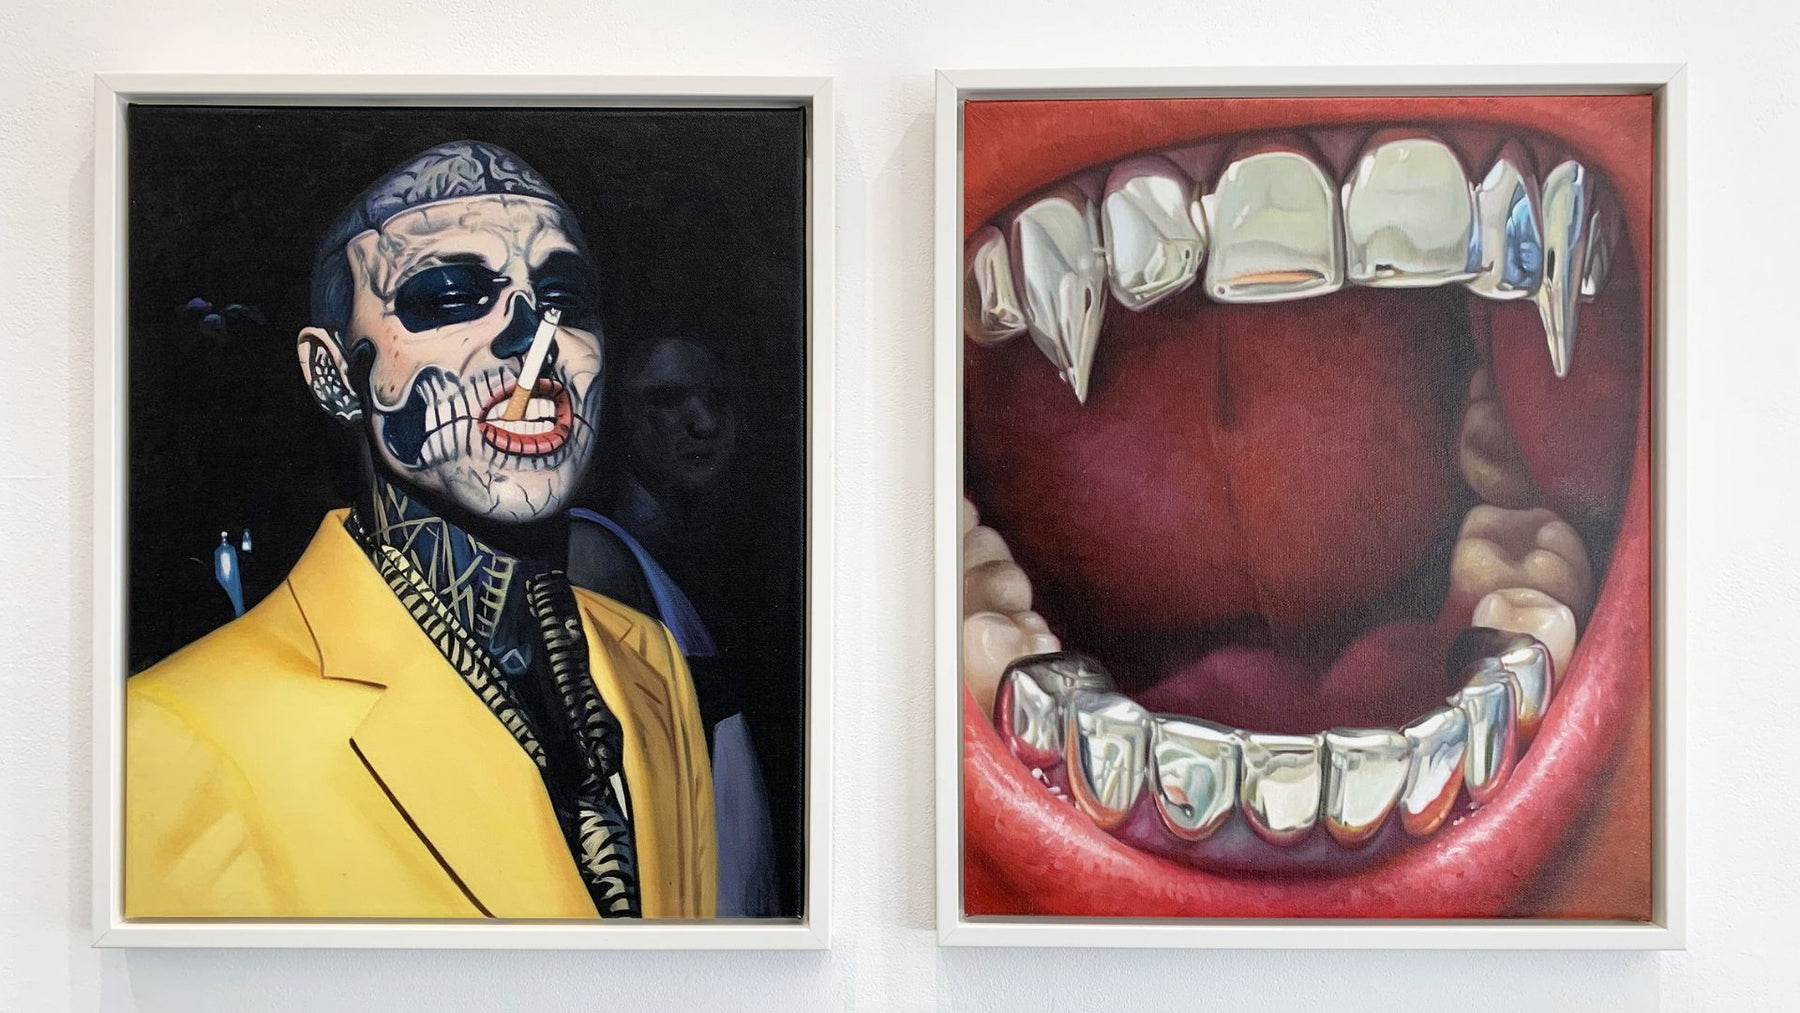 Image of a skeleton man wearing a yellow suit and a mouth showing teeth and fangs paintings by Tati Holt.